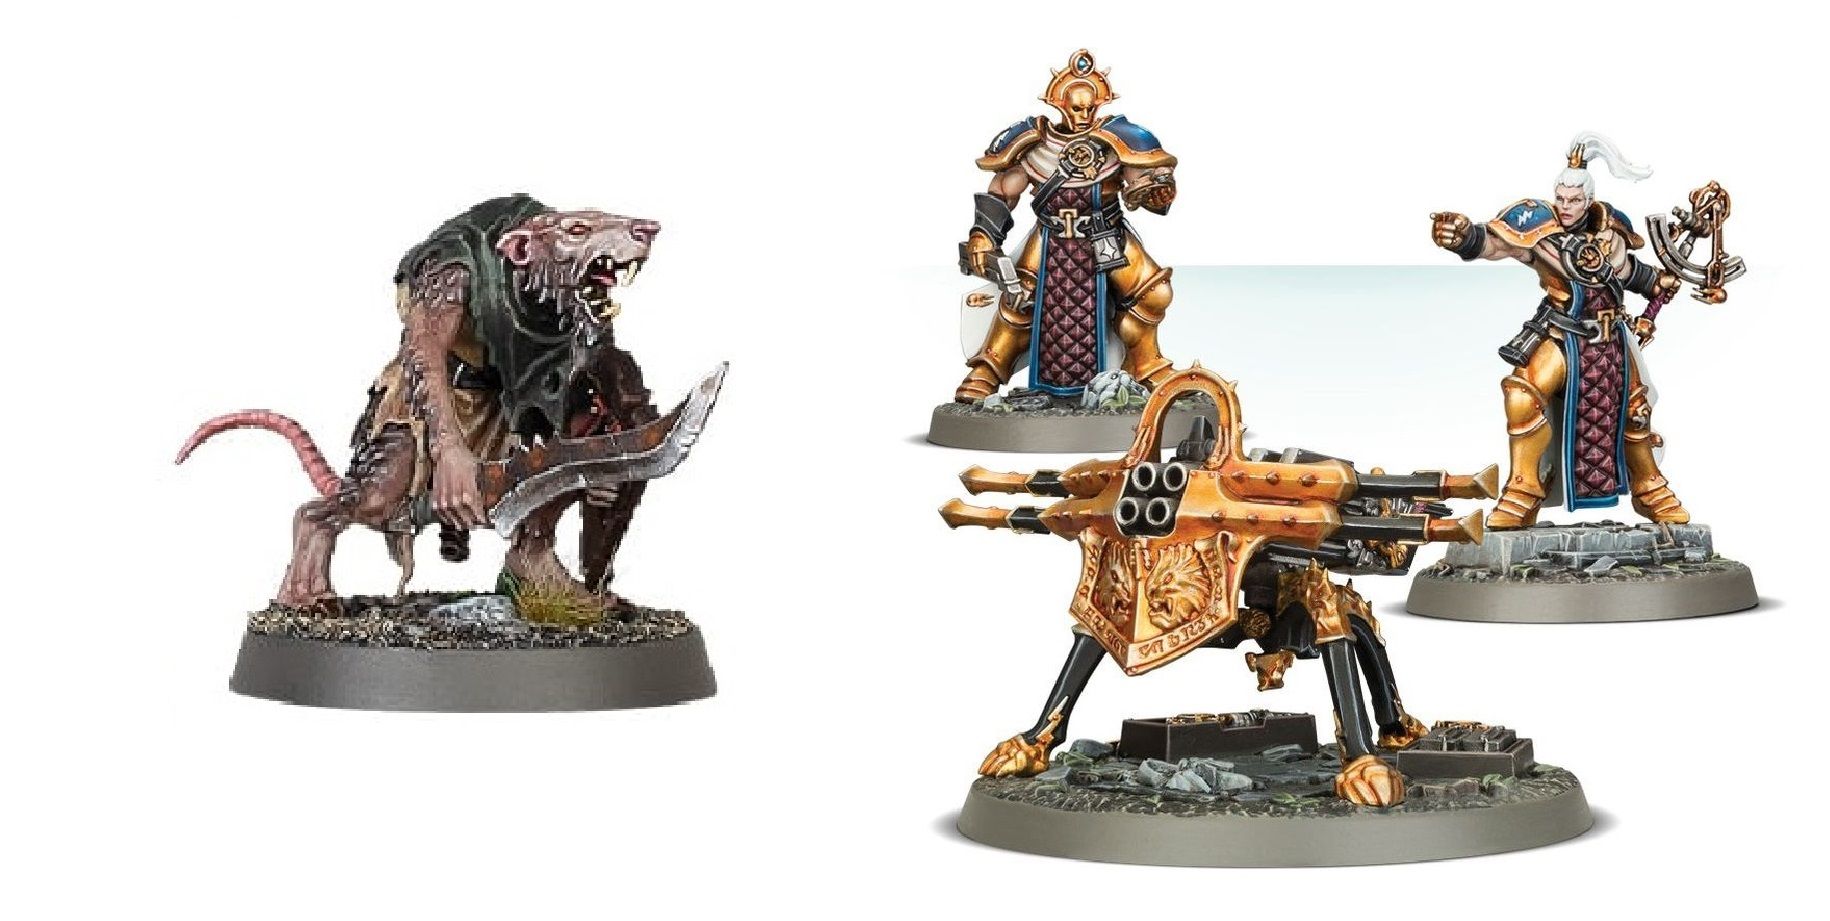 a new skaven clanrat and age of sigmar stormcast ballista for warhammer age of sigmar